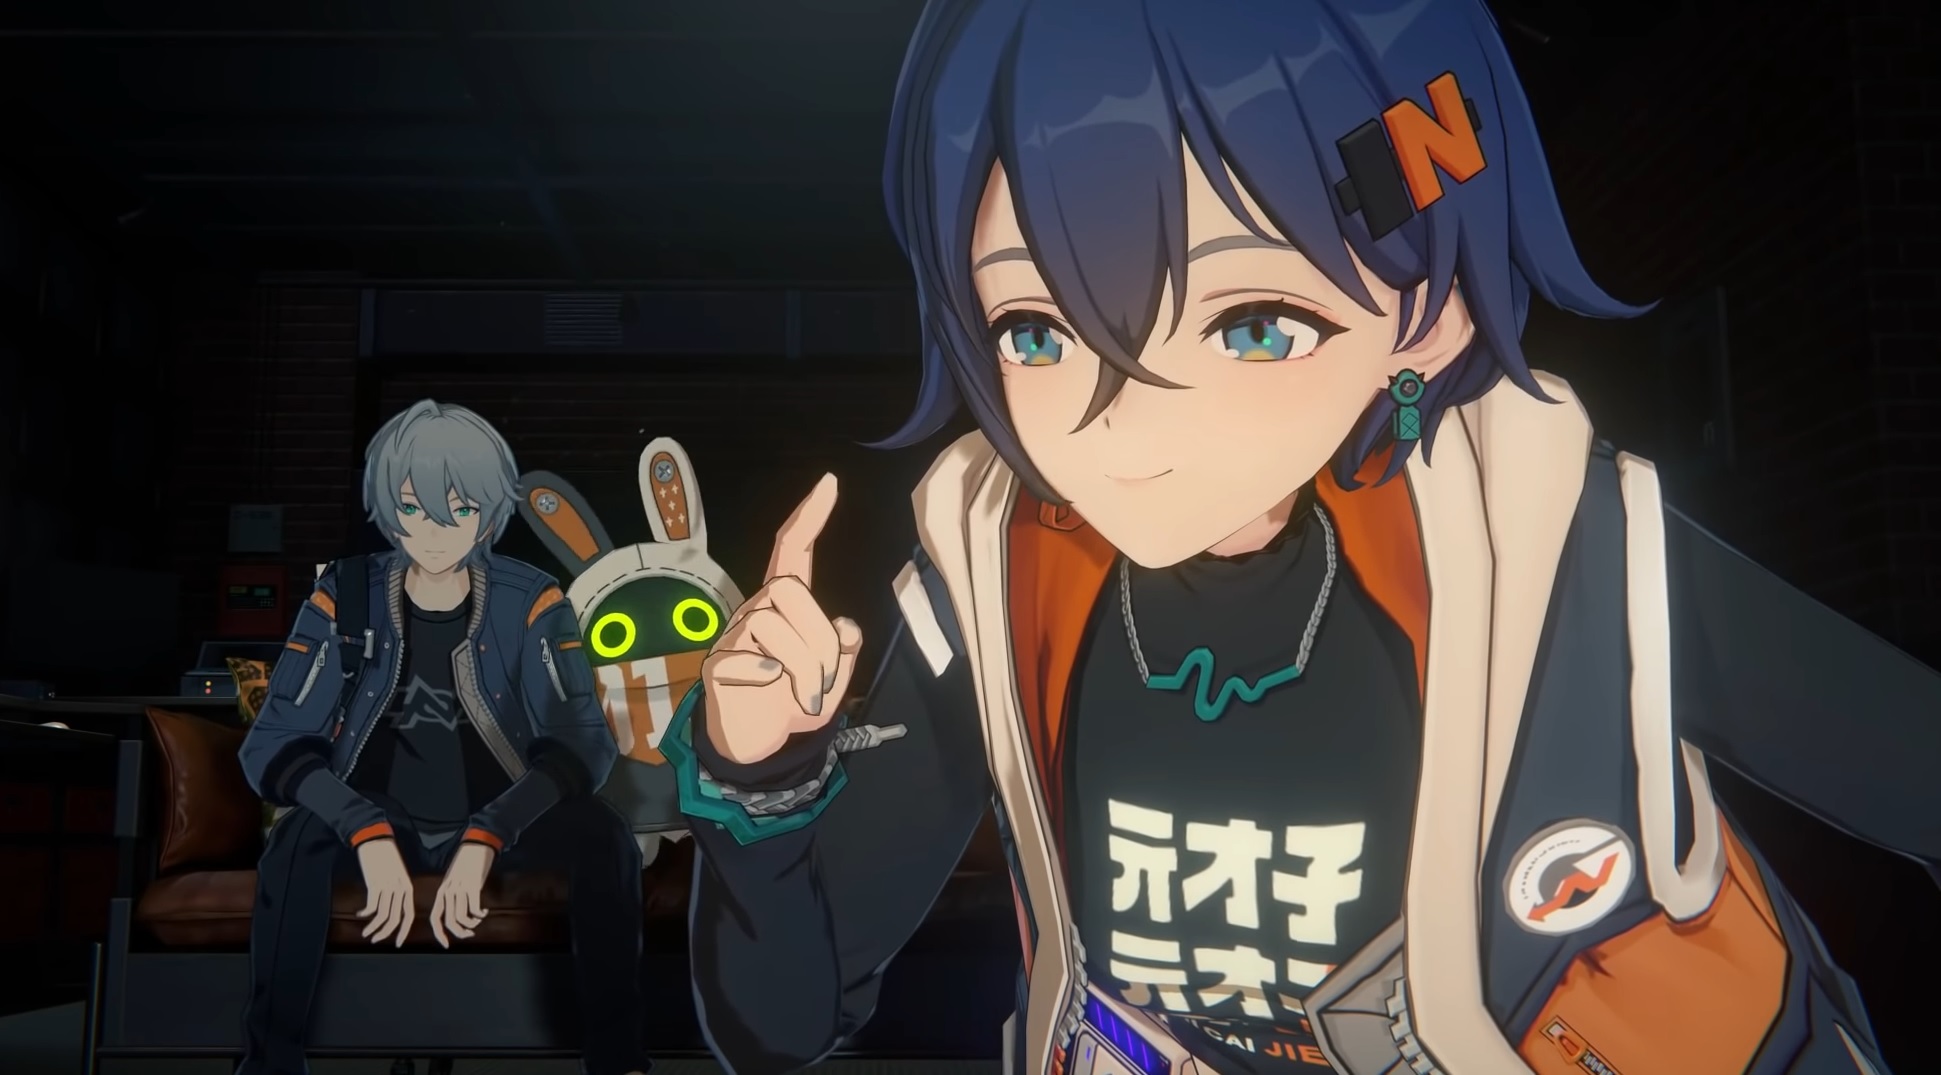 Zenless Zone Zero - A girl with short blue hair and a jacket kneels near the camera while a boy with short blue hair sits in the background beside a stuffed bunny creature with green eyes.